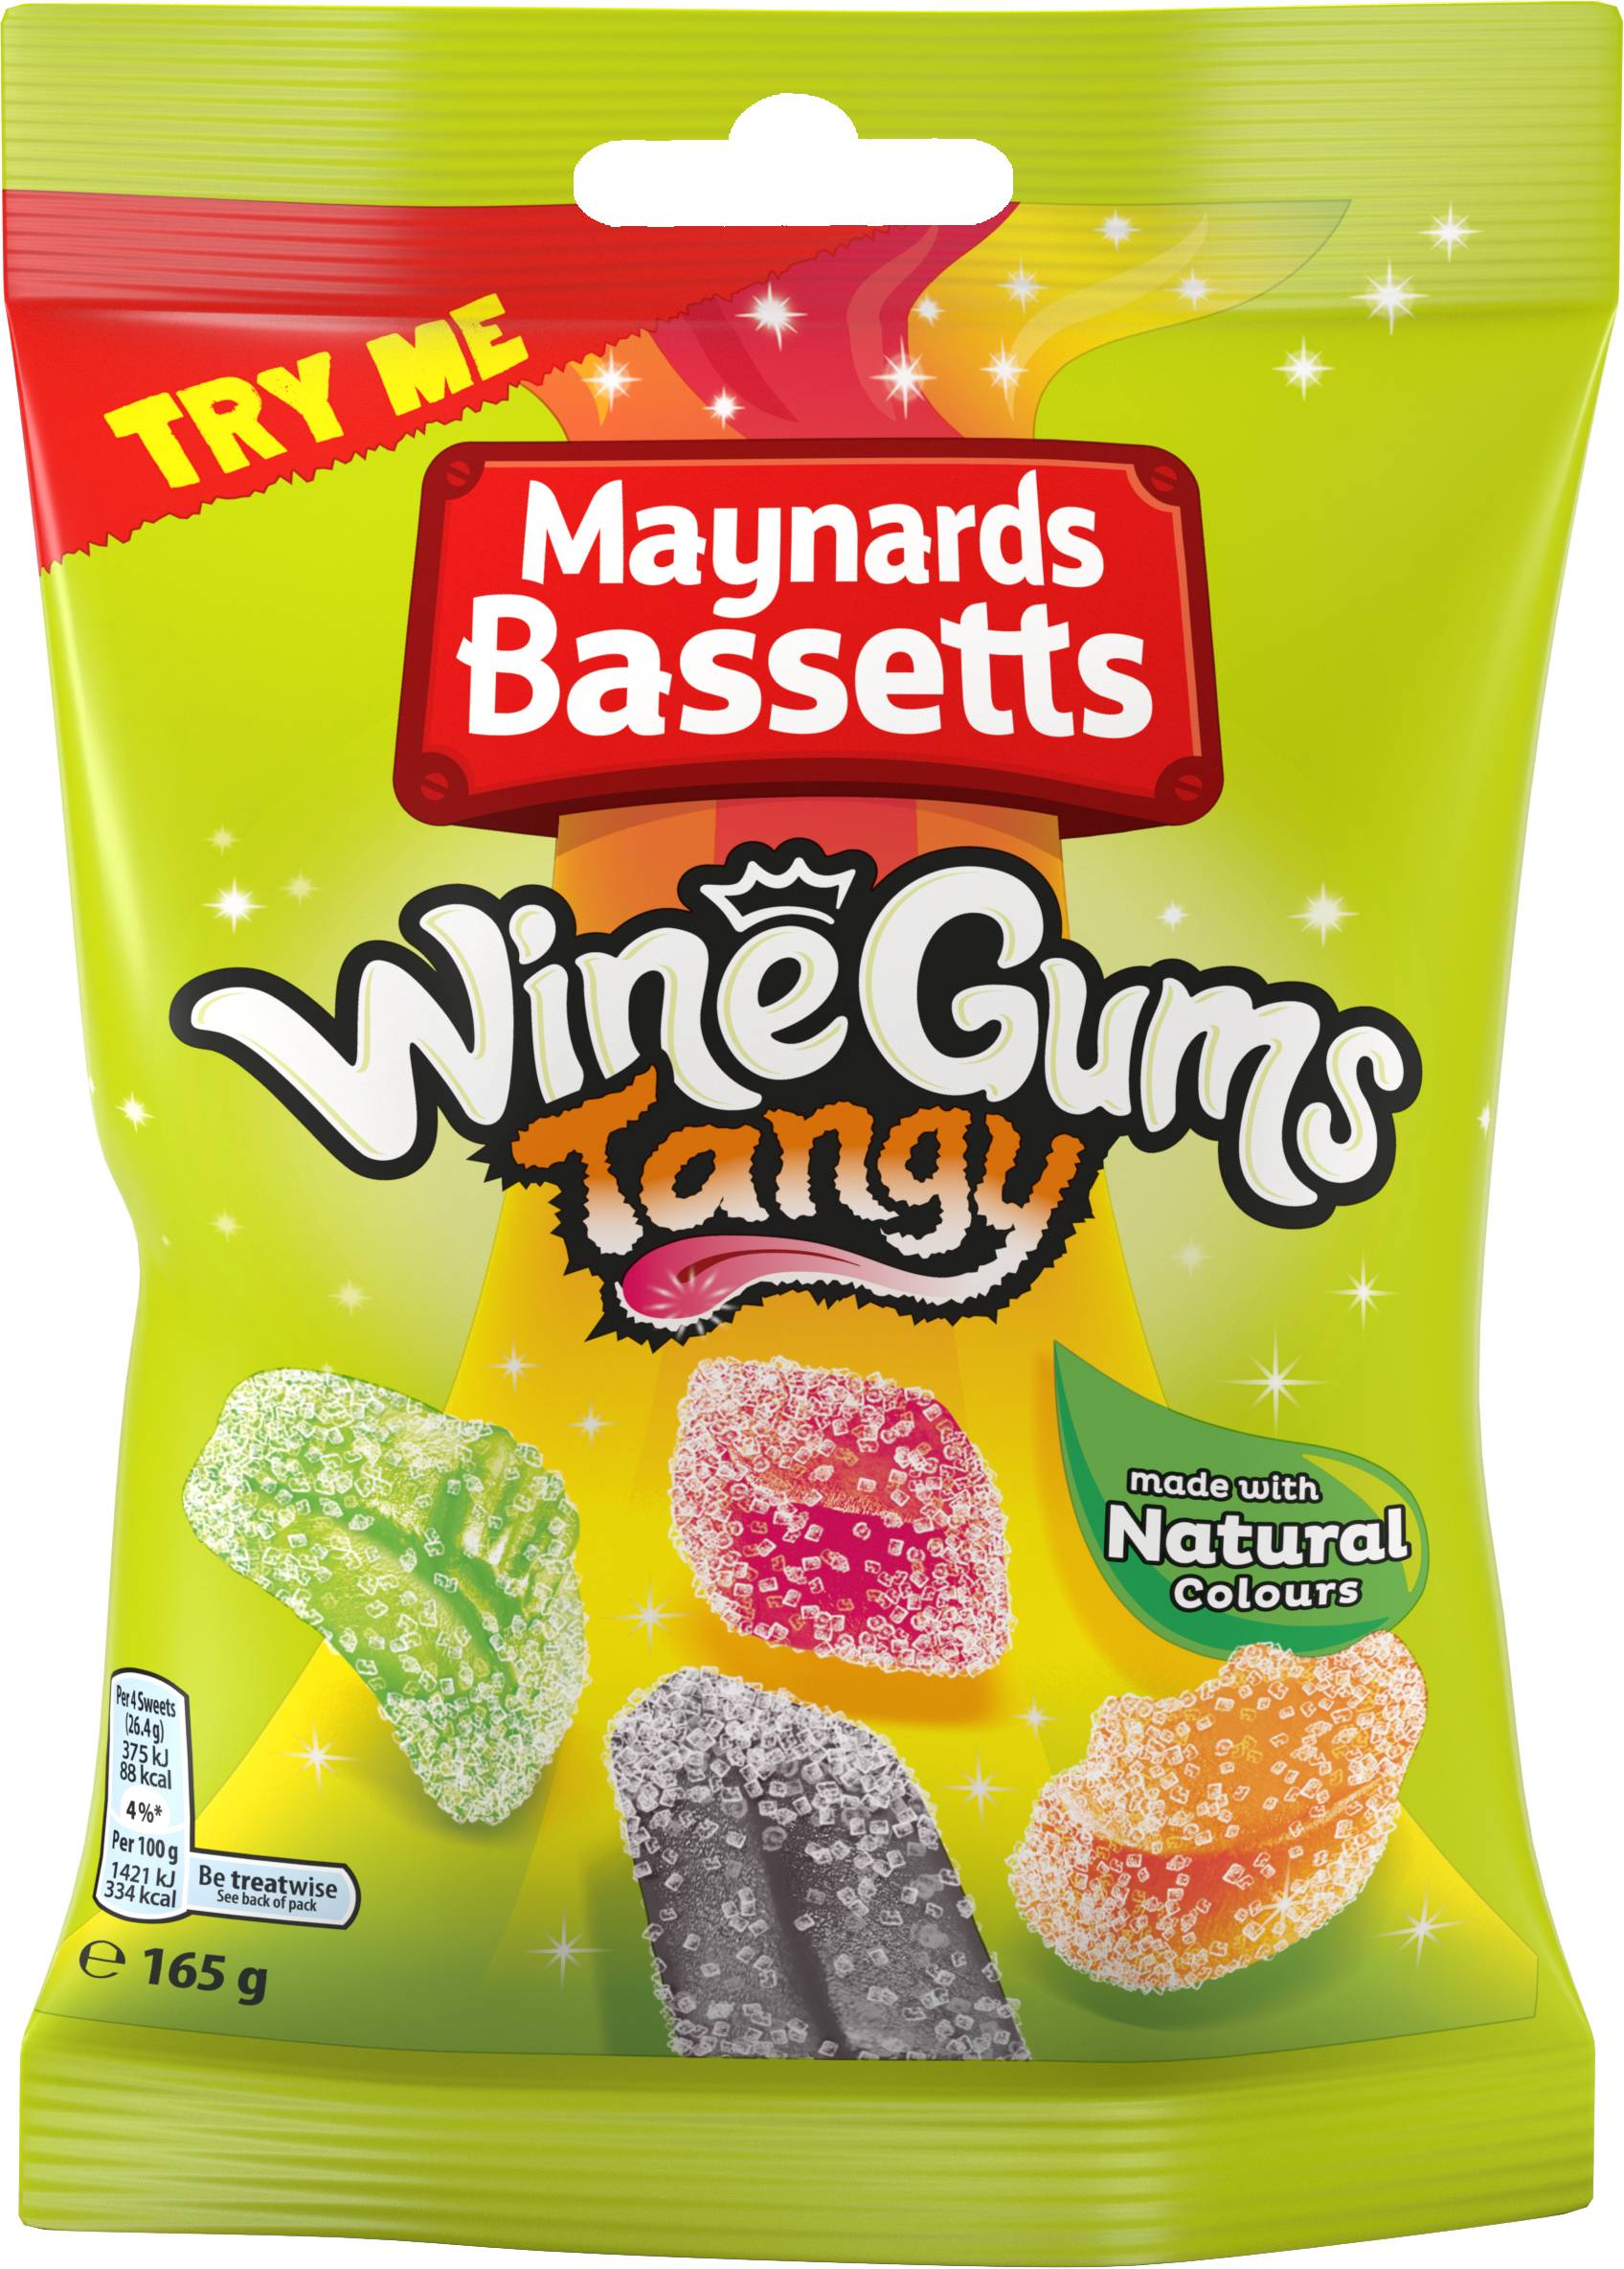 Wine Gums get a Tangy variant